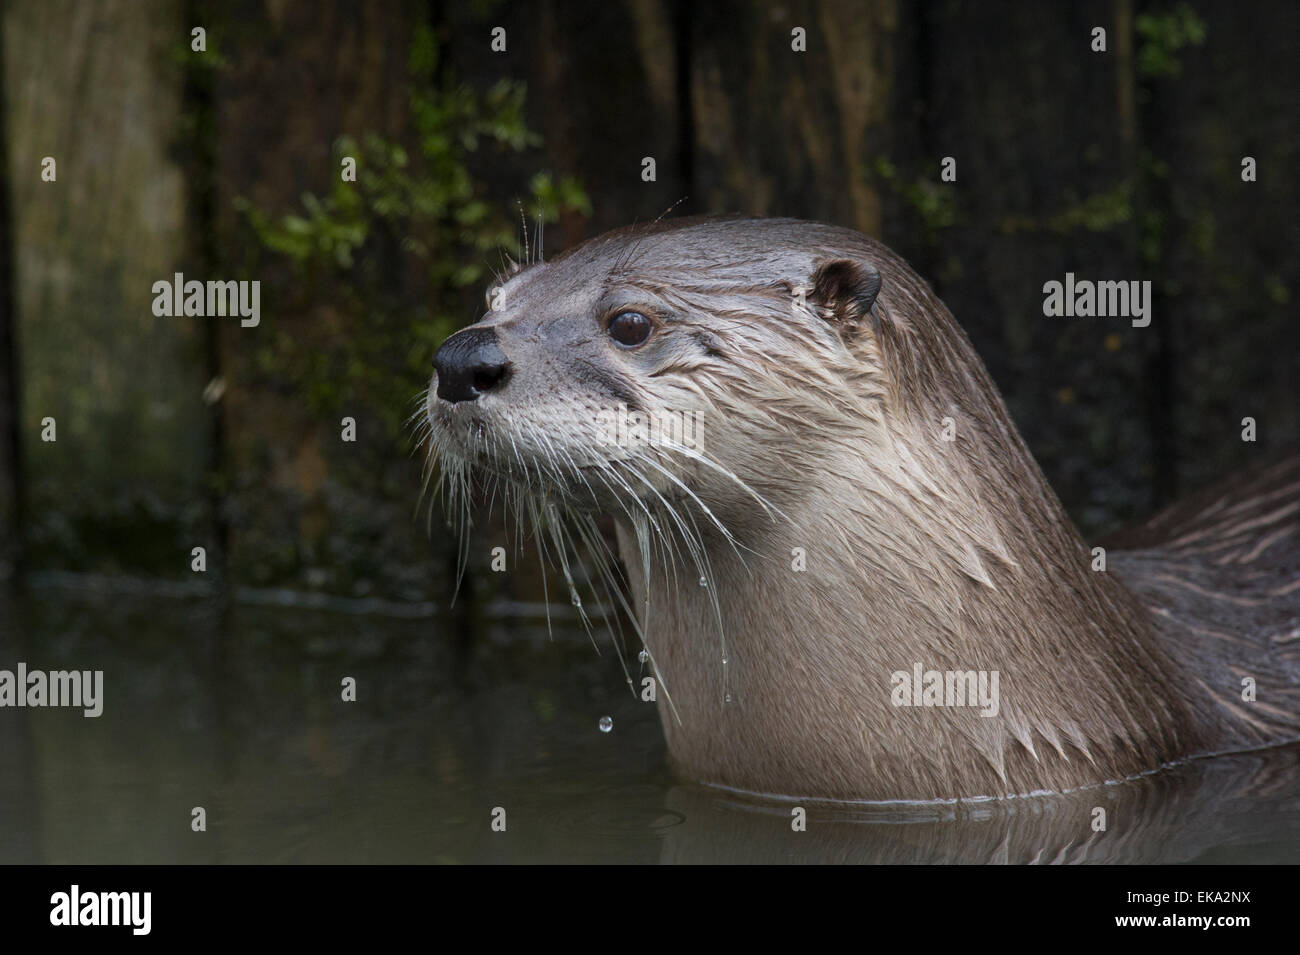 A Eurasian Otter (Lutra lutra) emerging from the water Stock Photo